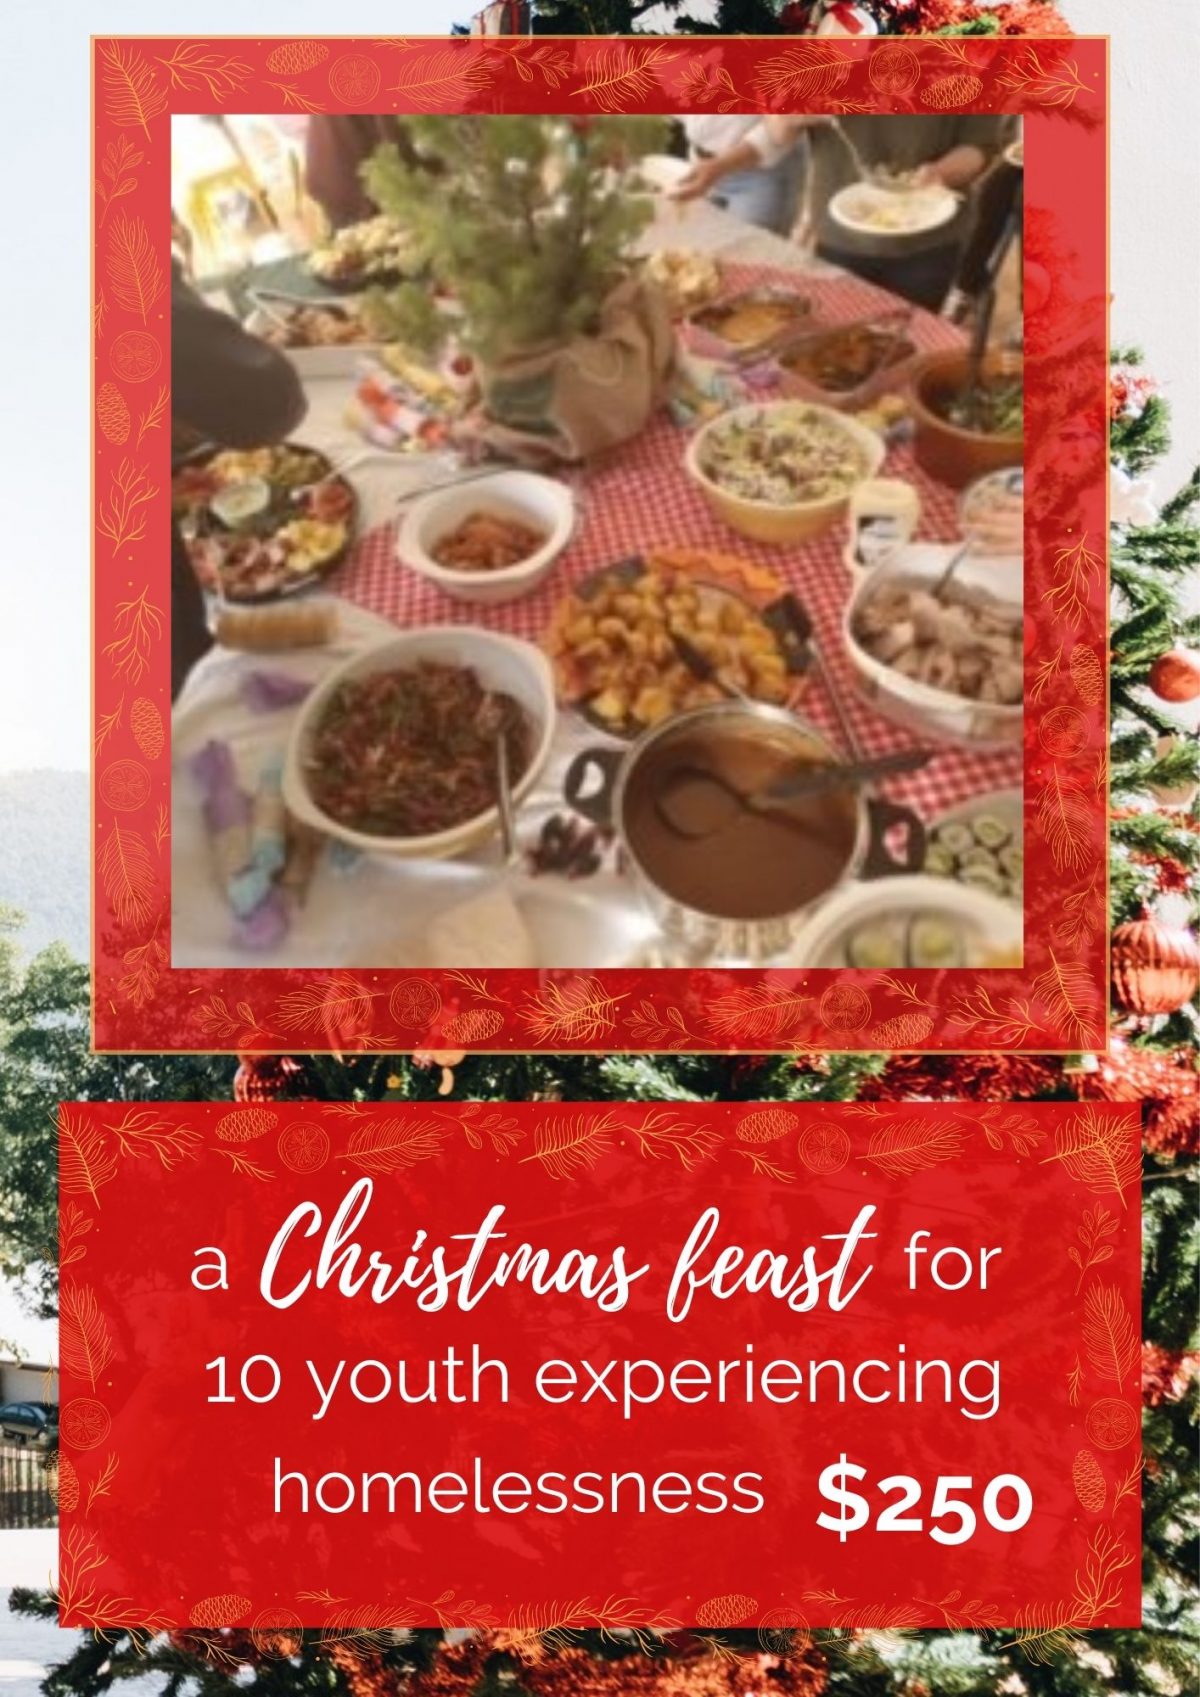 a Christmas feast for 10 young people experiencing homelessness. $250